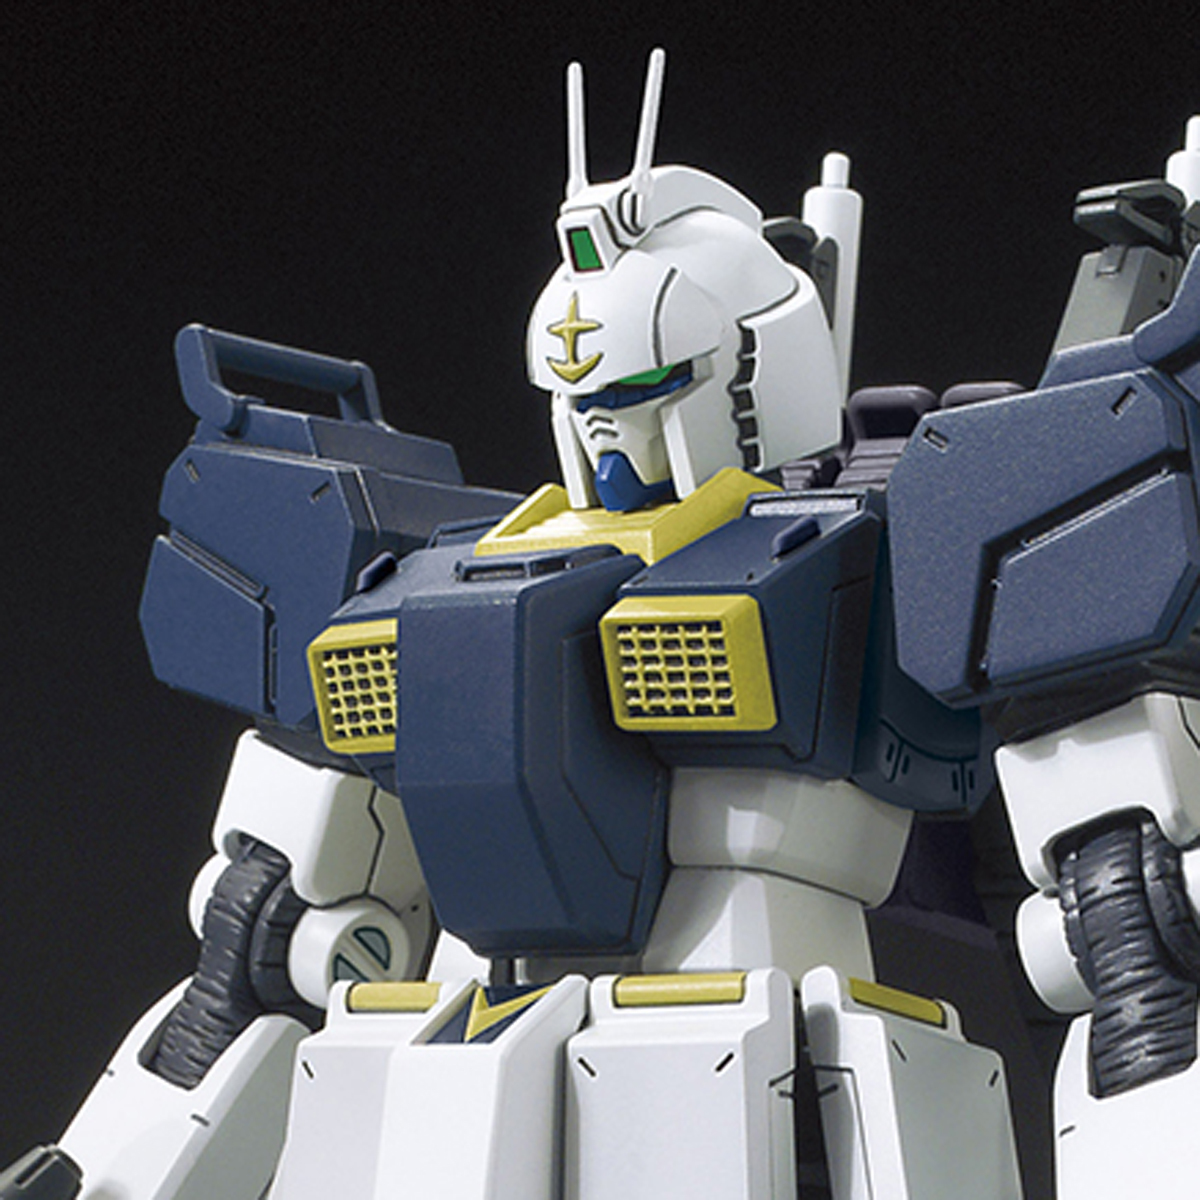 Hg 1 144 Rx 79 Gs Gundam Ground Type S Gundam Thunderbolt Ver Release Info Box Art And Official Images Gundam Kits Collection News And Reviews